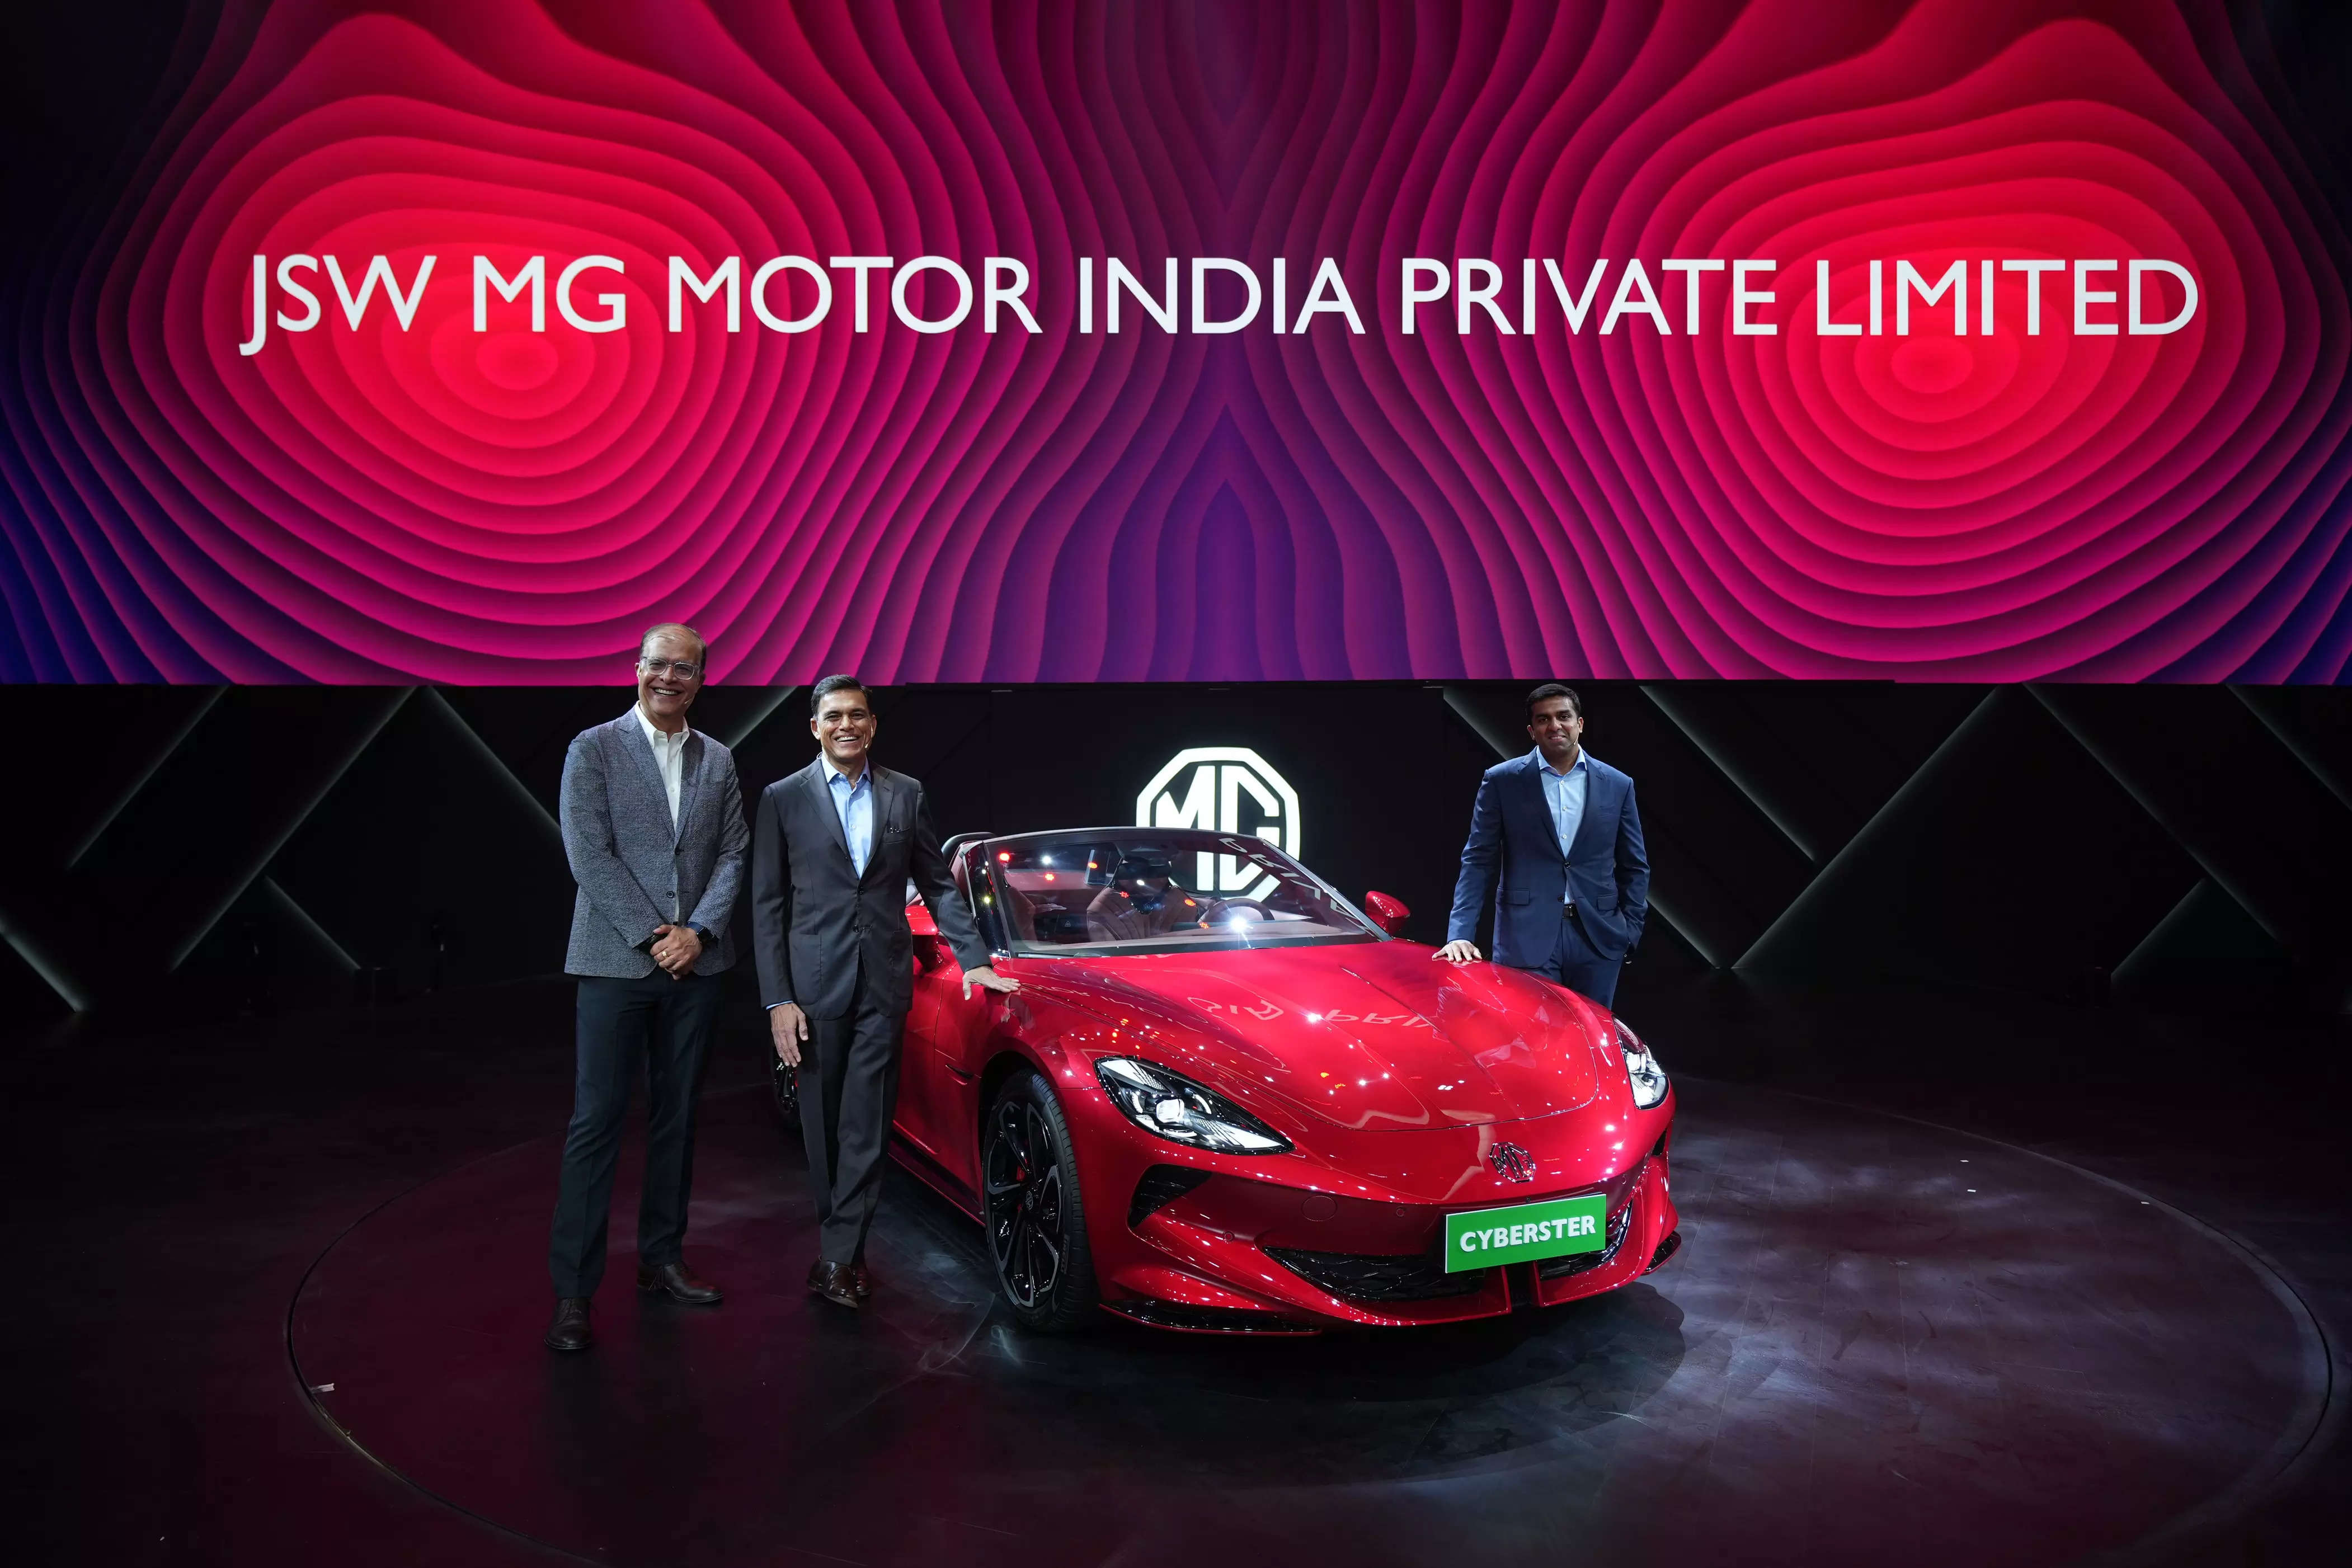 <p>The joint venture company has been named 'JSW MG Motor India' and the Chairman of the new entity will be from the JSW Group. <br /></p>